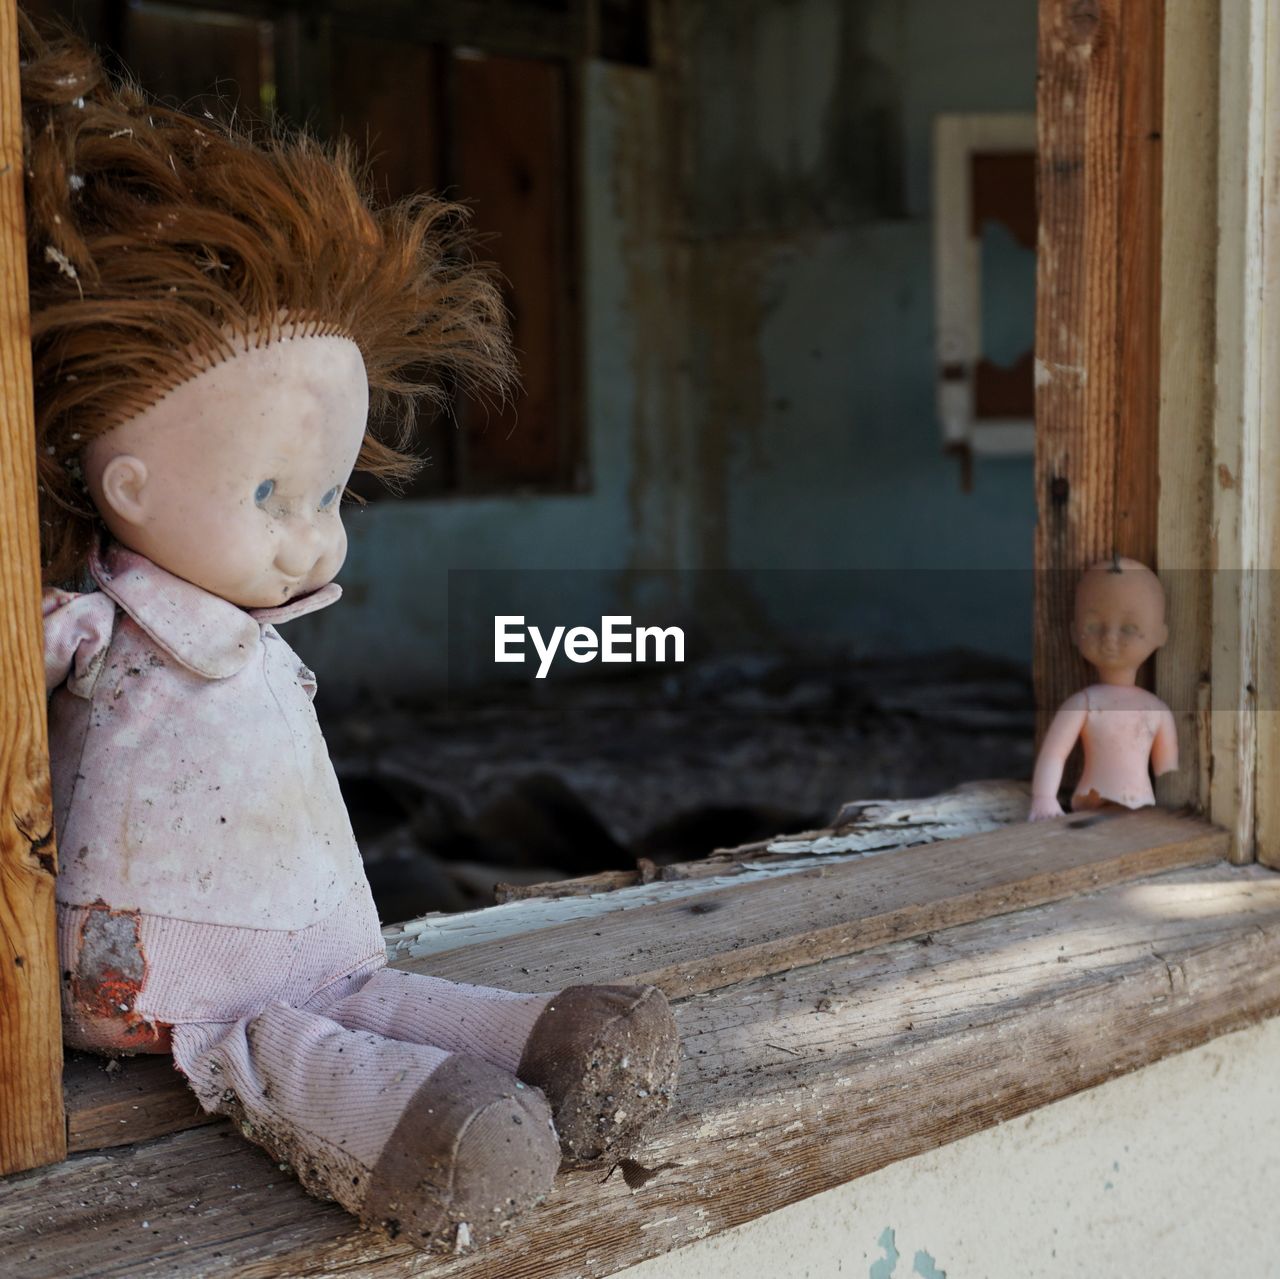 Doll on windowsill in abandoned building